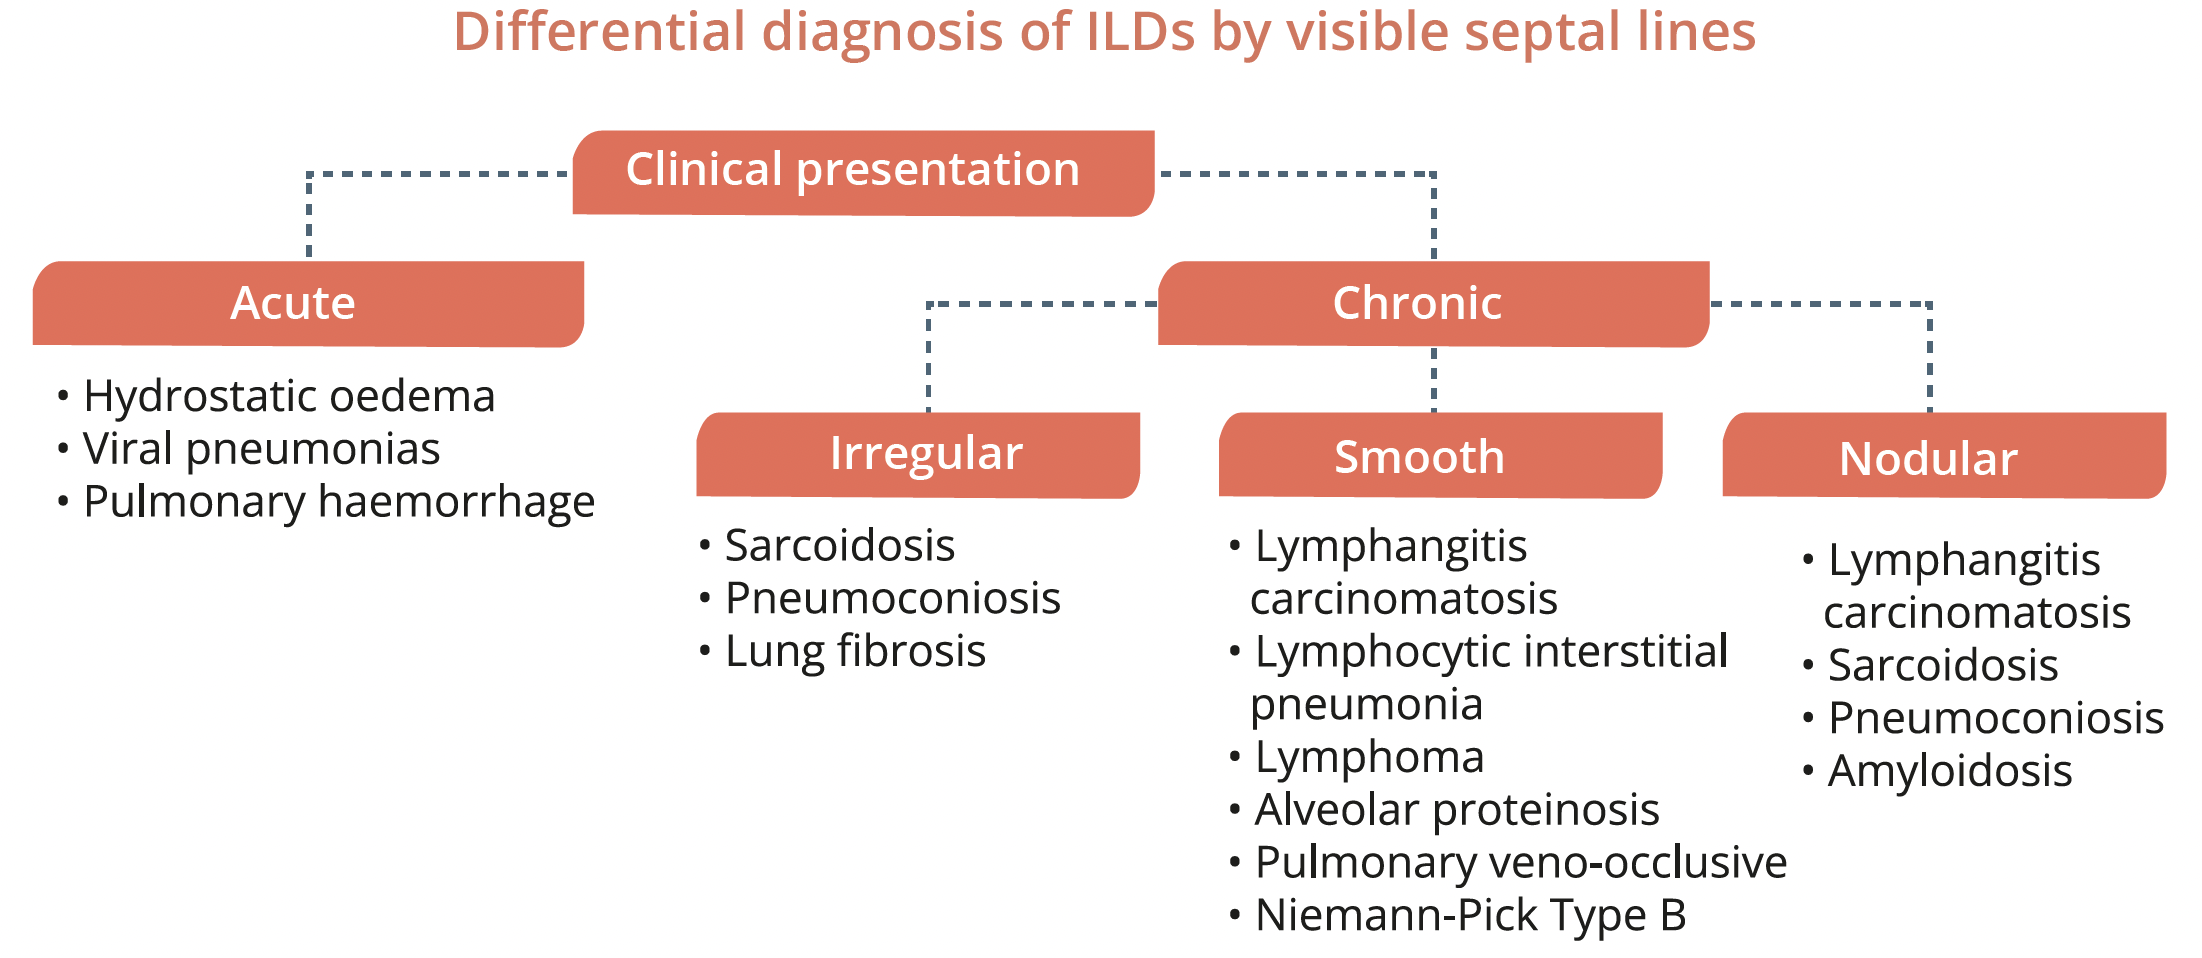 Characterisation of disease into acute or chronic and the appearance of septal lines can help with differential diagnosis of interstitial lung disease (ILD)